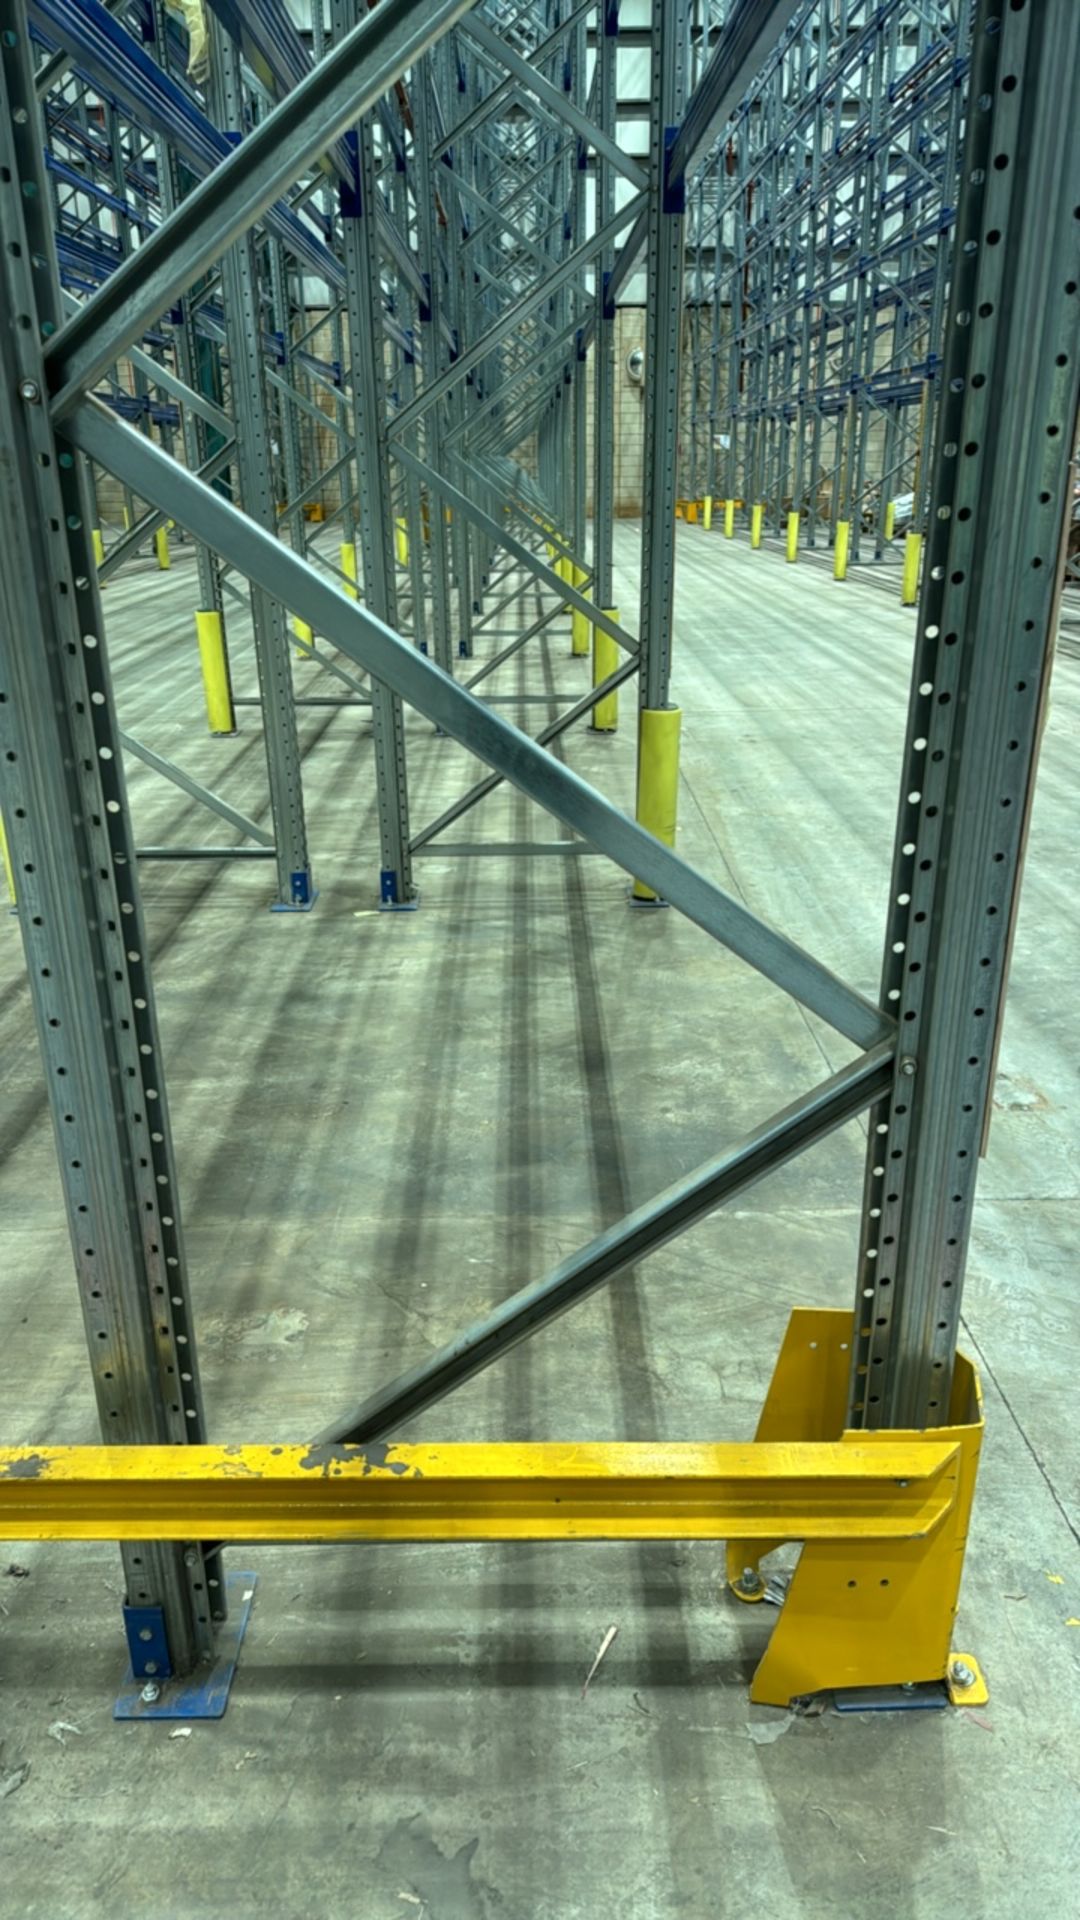 Run Of 22 Bays Of Back To Back Boltless Pallet Racking - Image 7 of 10